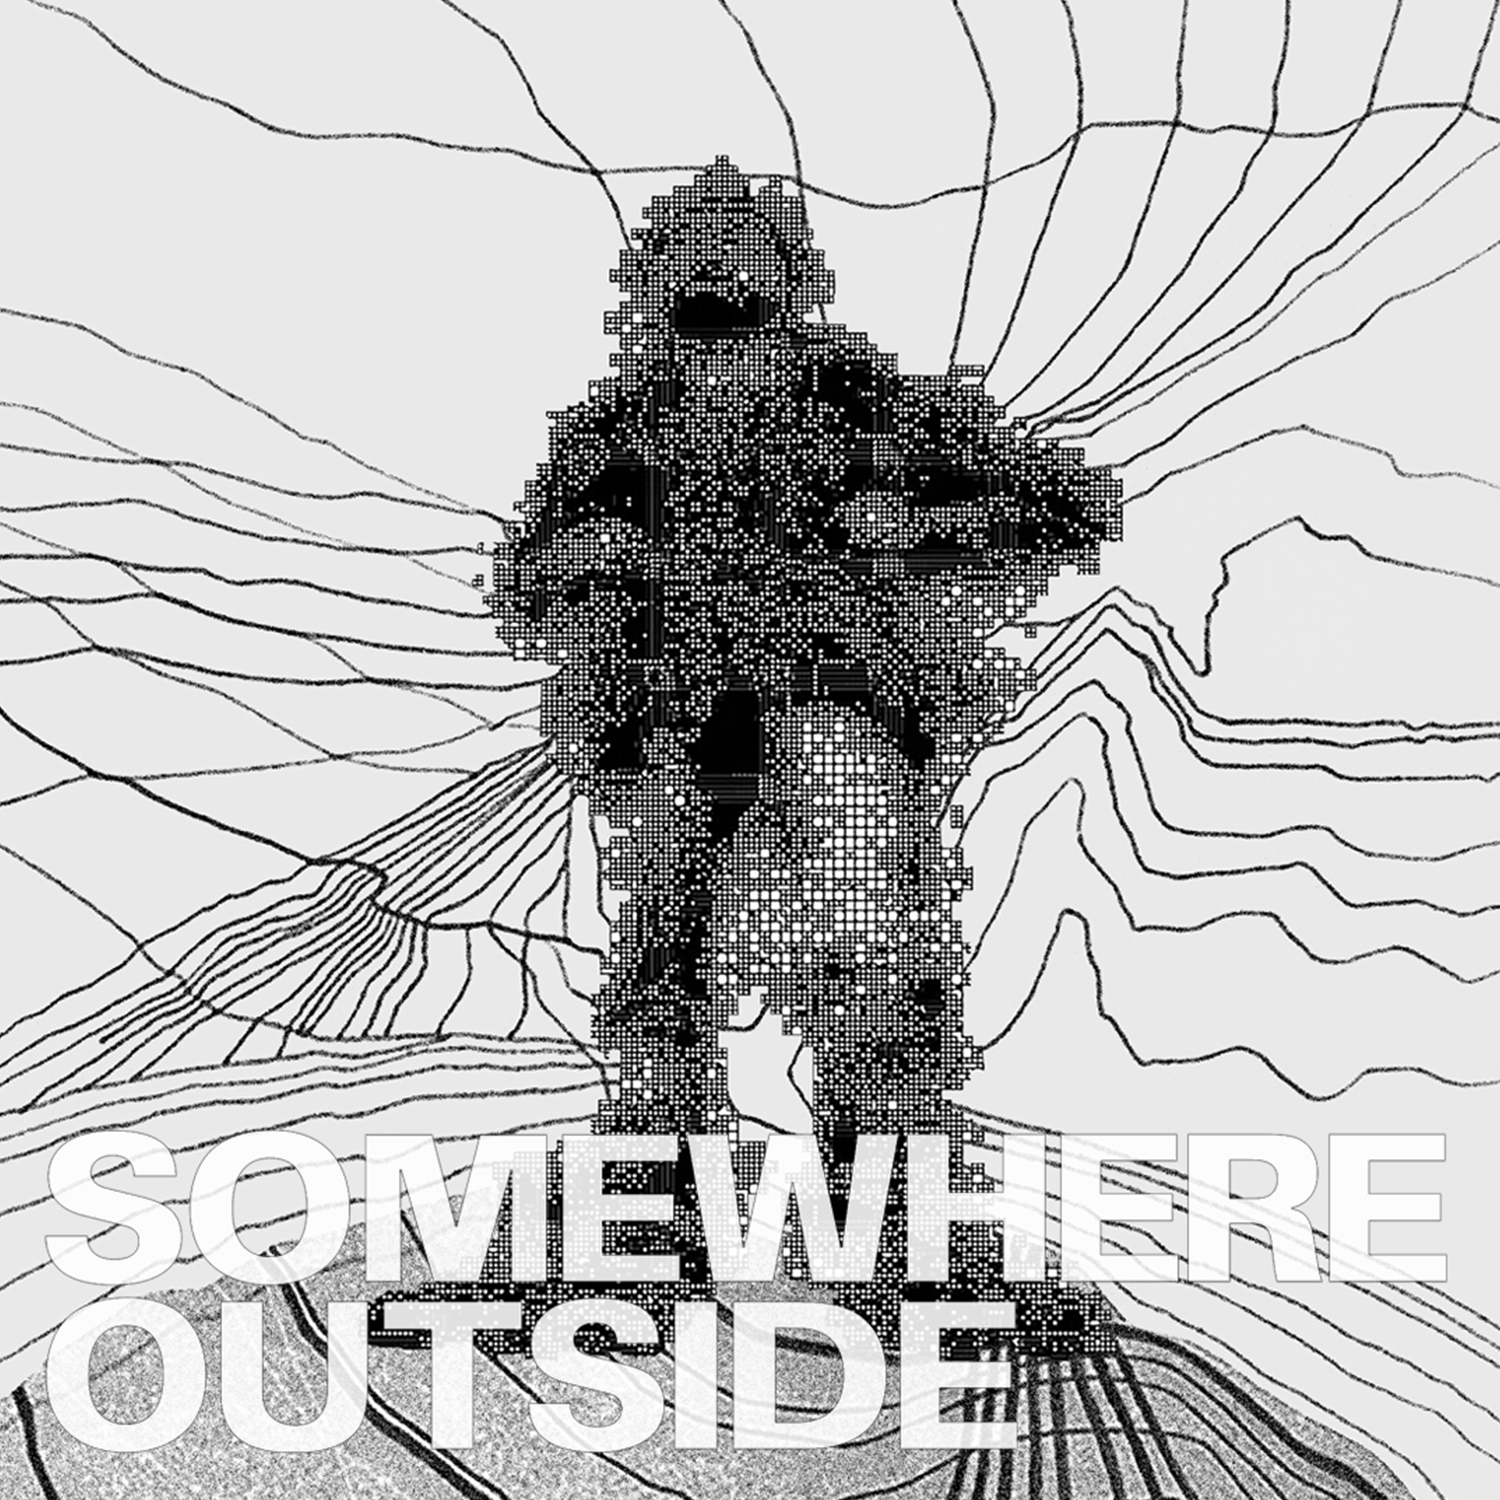 SOMEWHERE OUTSDIE HIKING COMPANY